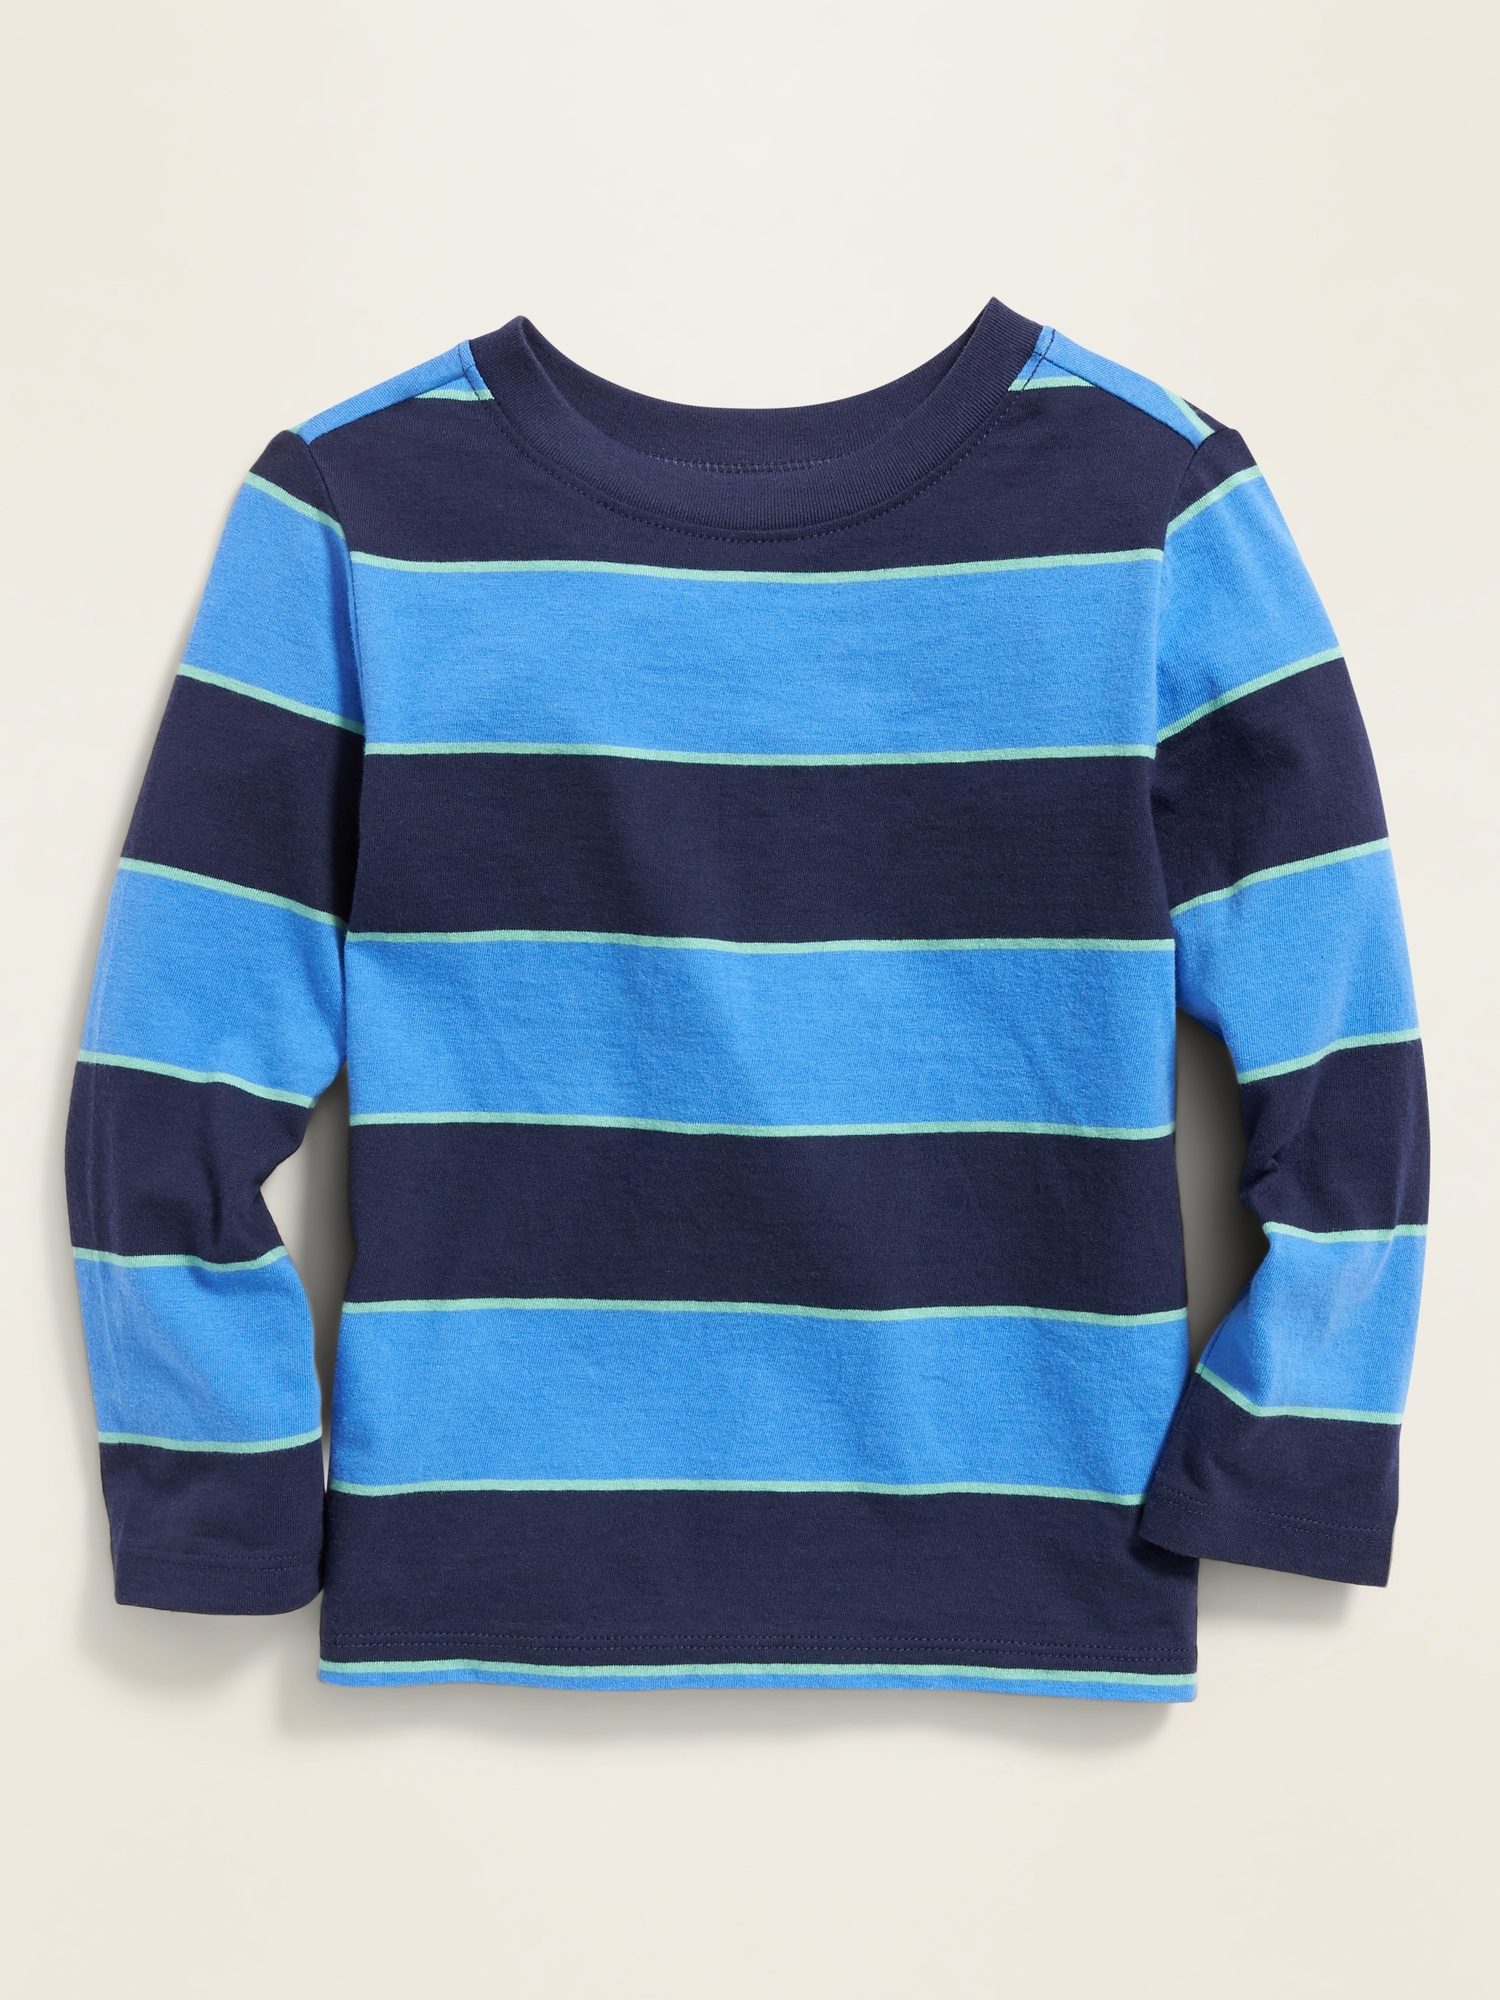 Baby Toddlers Long Sleeve Tee Little Kids Cotton Striped T-Shirt Crew Neck Tops